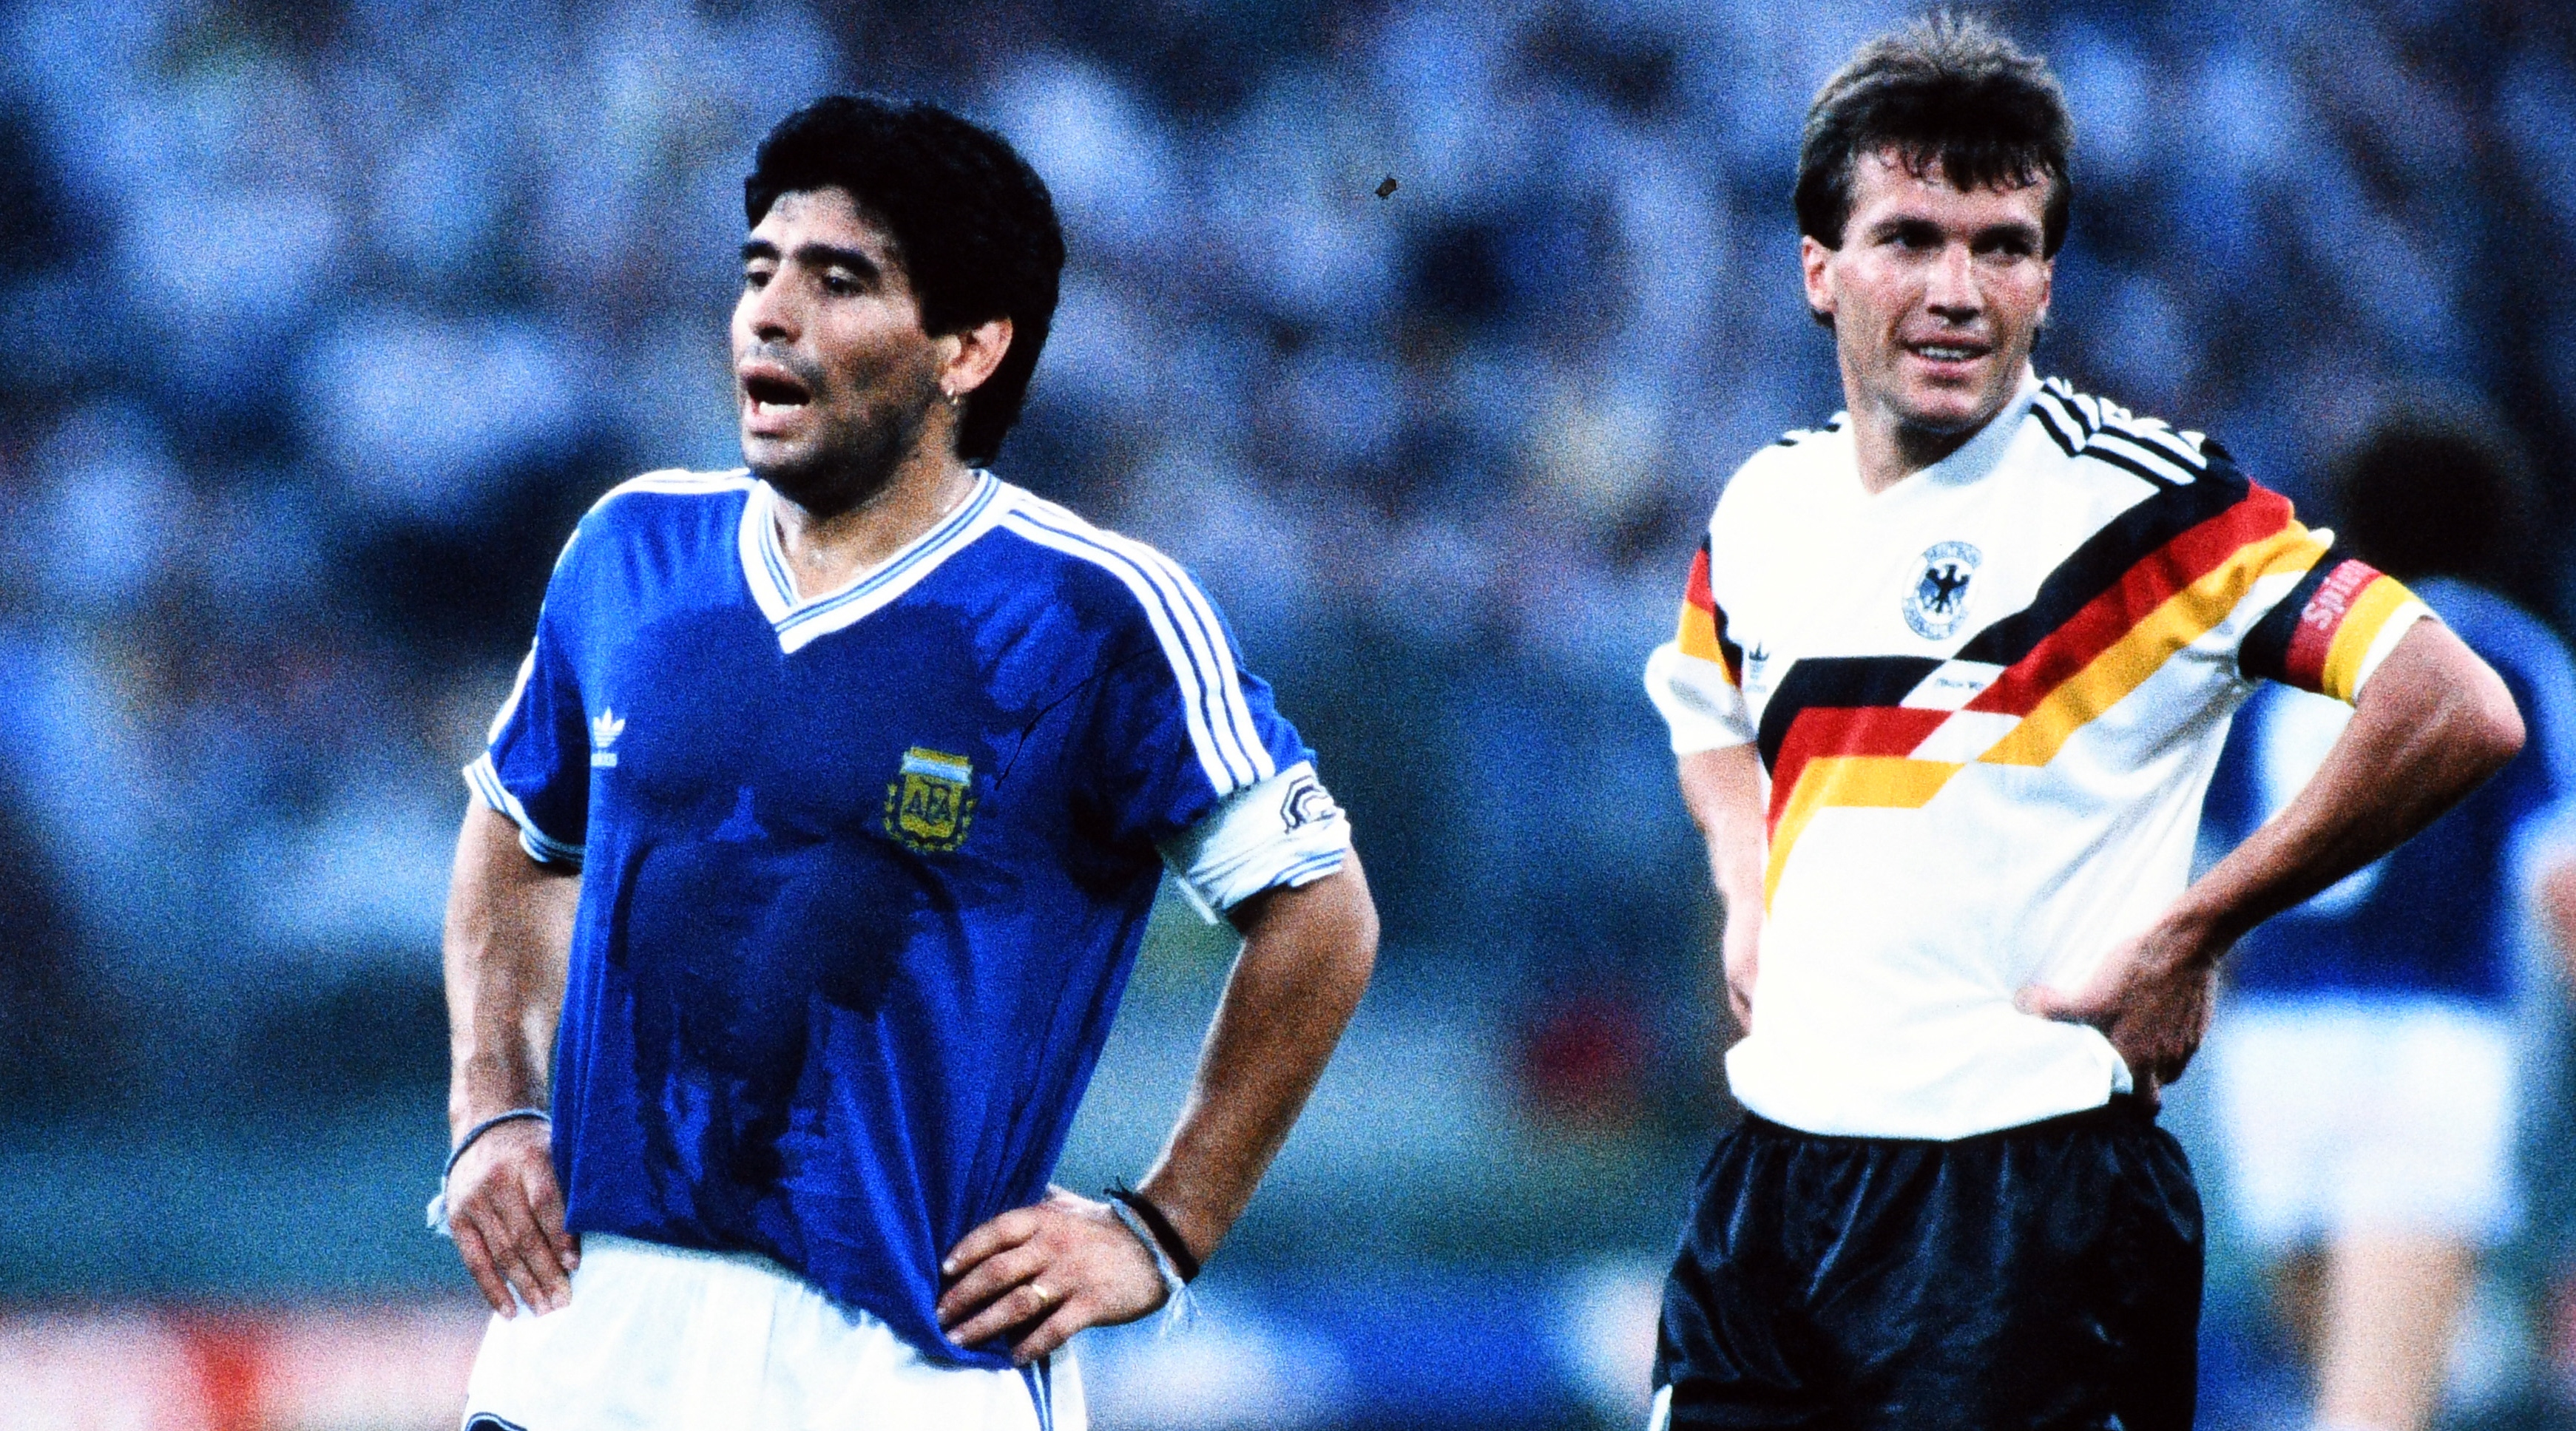 Diego Maradona of Argentina and Lothar Matthaus of West Germany during the 1990 FIFA World Cup Final between West Germany and Argentina at the Stadio Olimpico in Rome, Italy